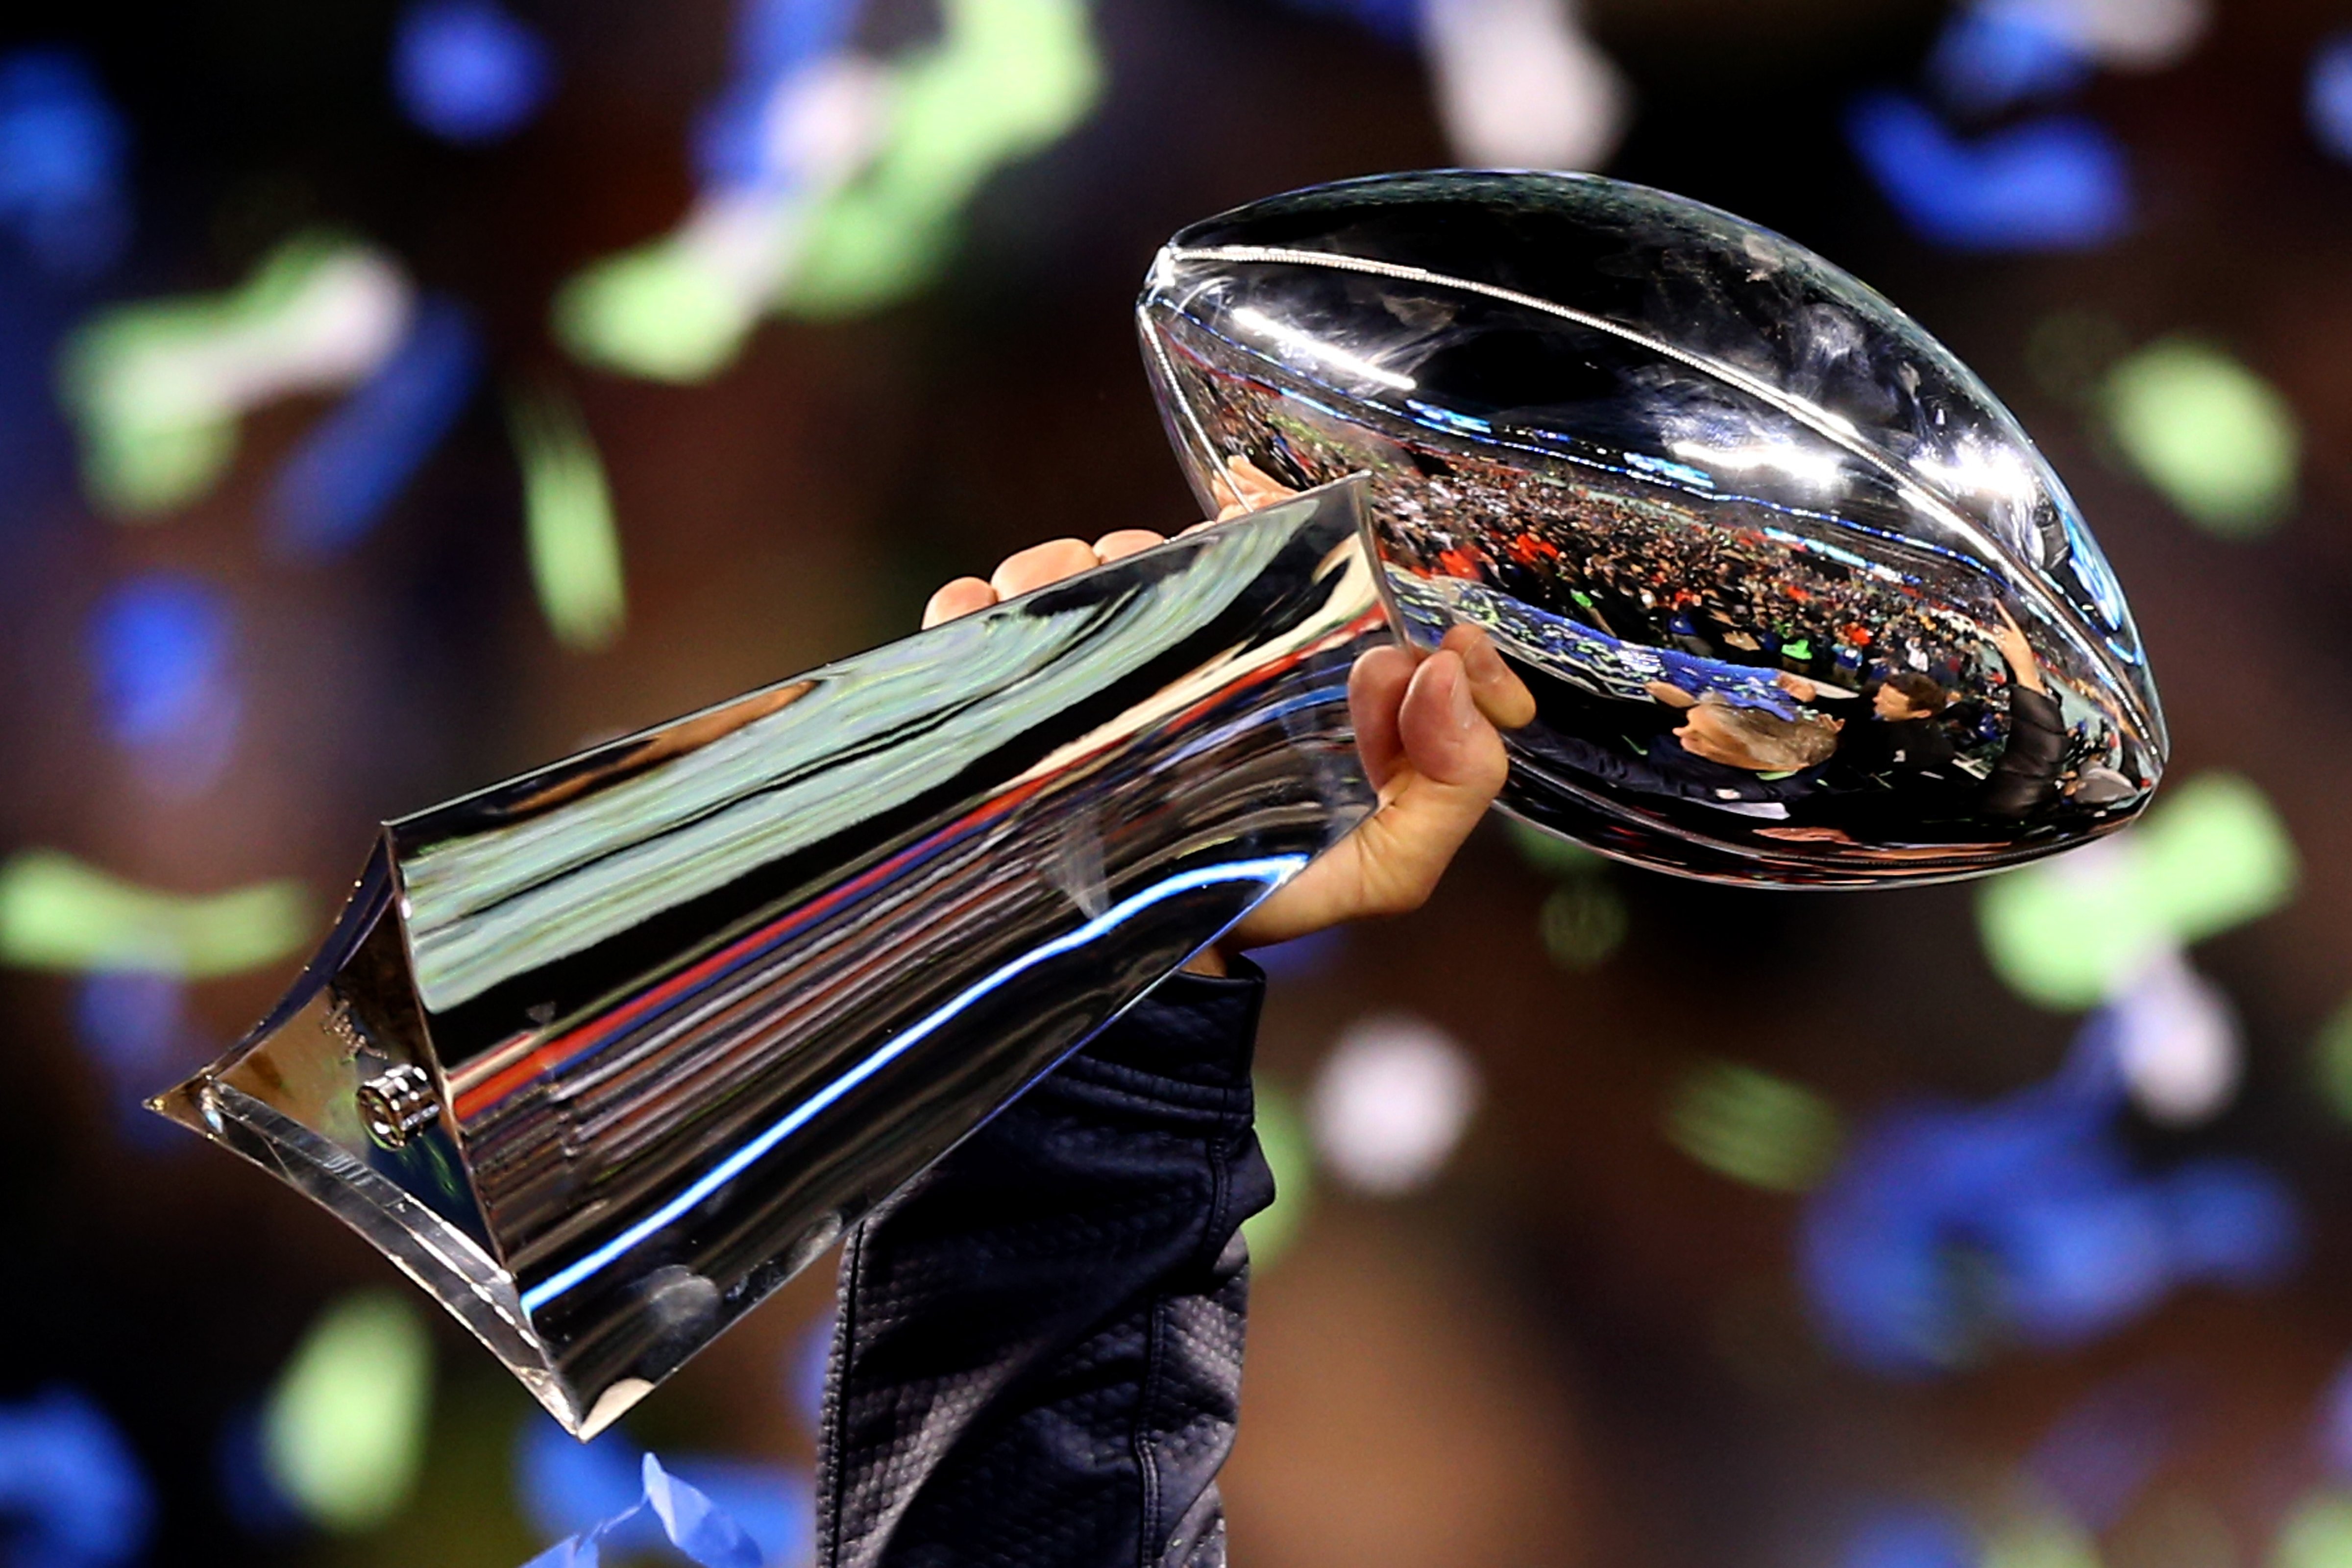 Head coach Pete Carroll of the Seattle Seahawks holds the Vince Lombardi Trophy after his team won Super Bowl XLVIII at MetLife Stadium on February 2, 2014 in East Rutherford, New Jersey. (Elsa&mdash;Getty Images)